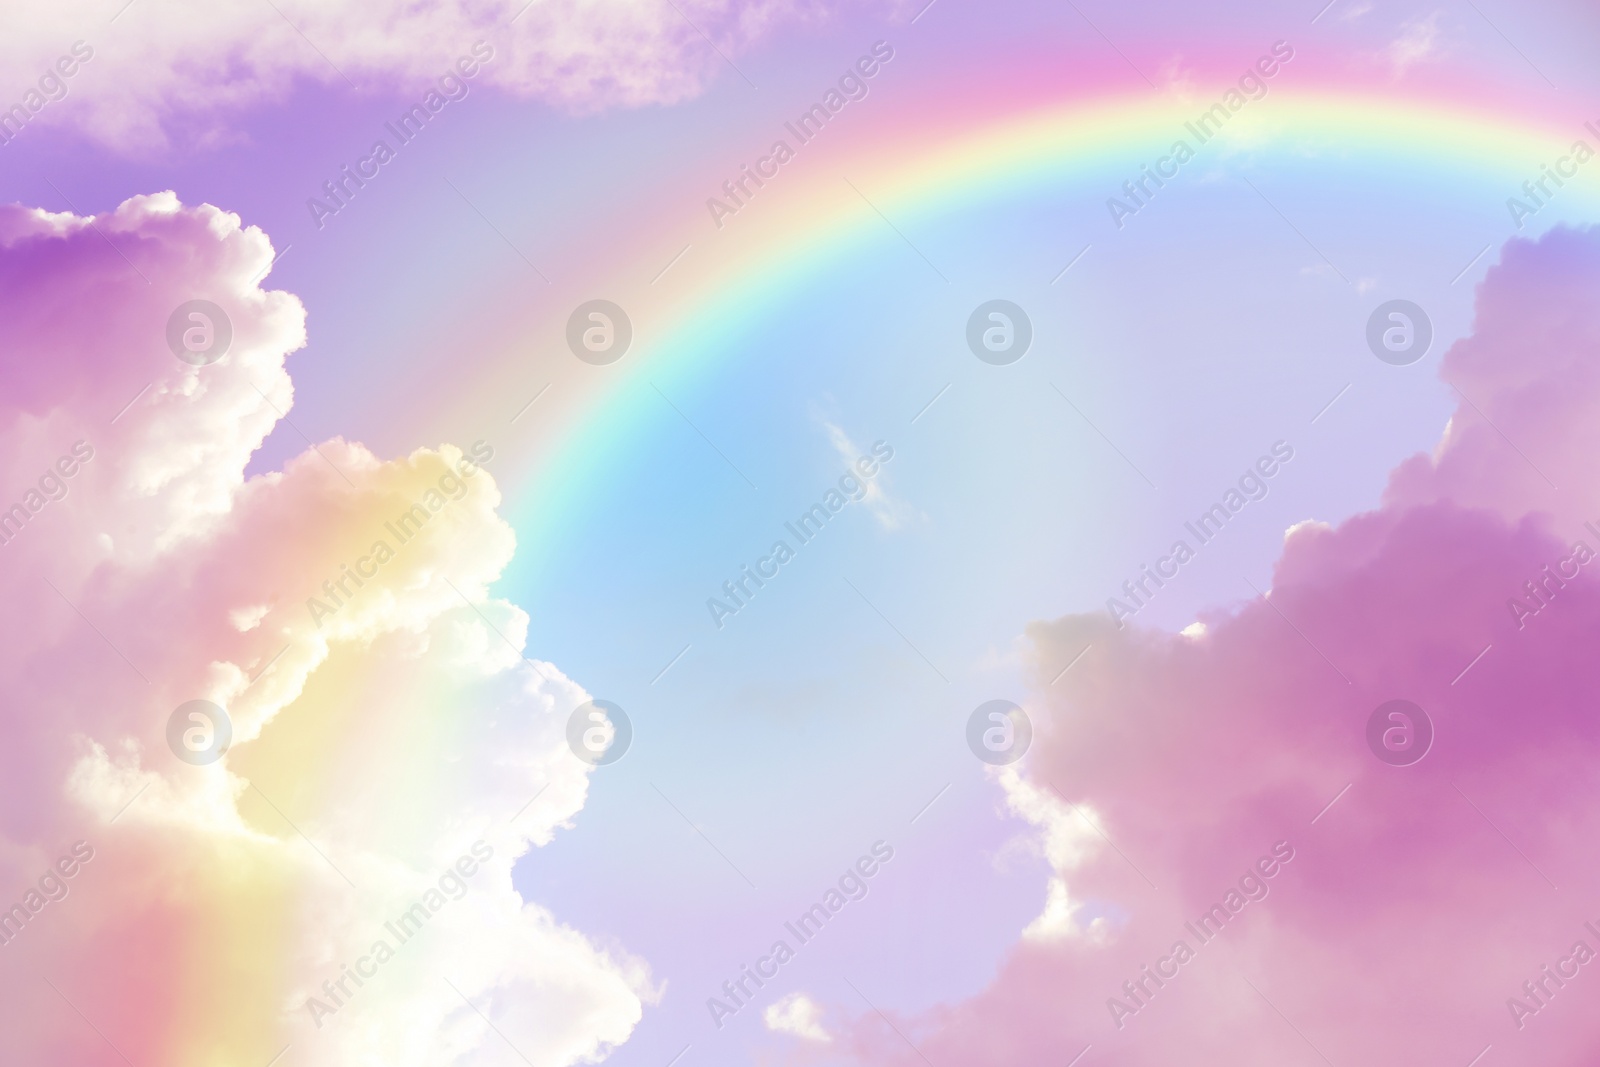 Image of Amazing sky with rainbow and fluffy clouds, toned in unicorn colors